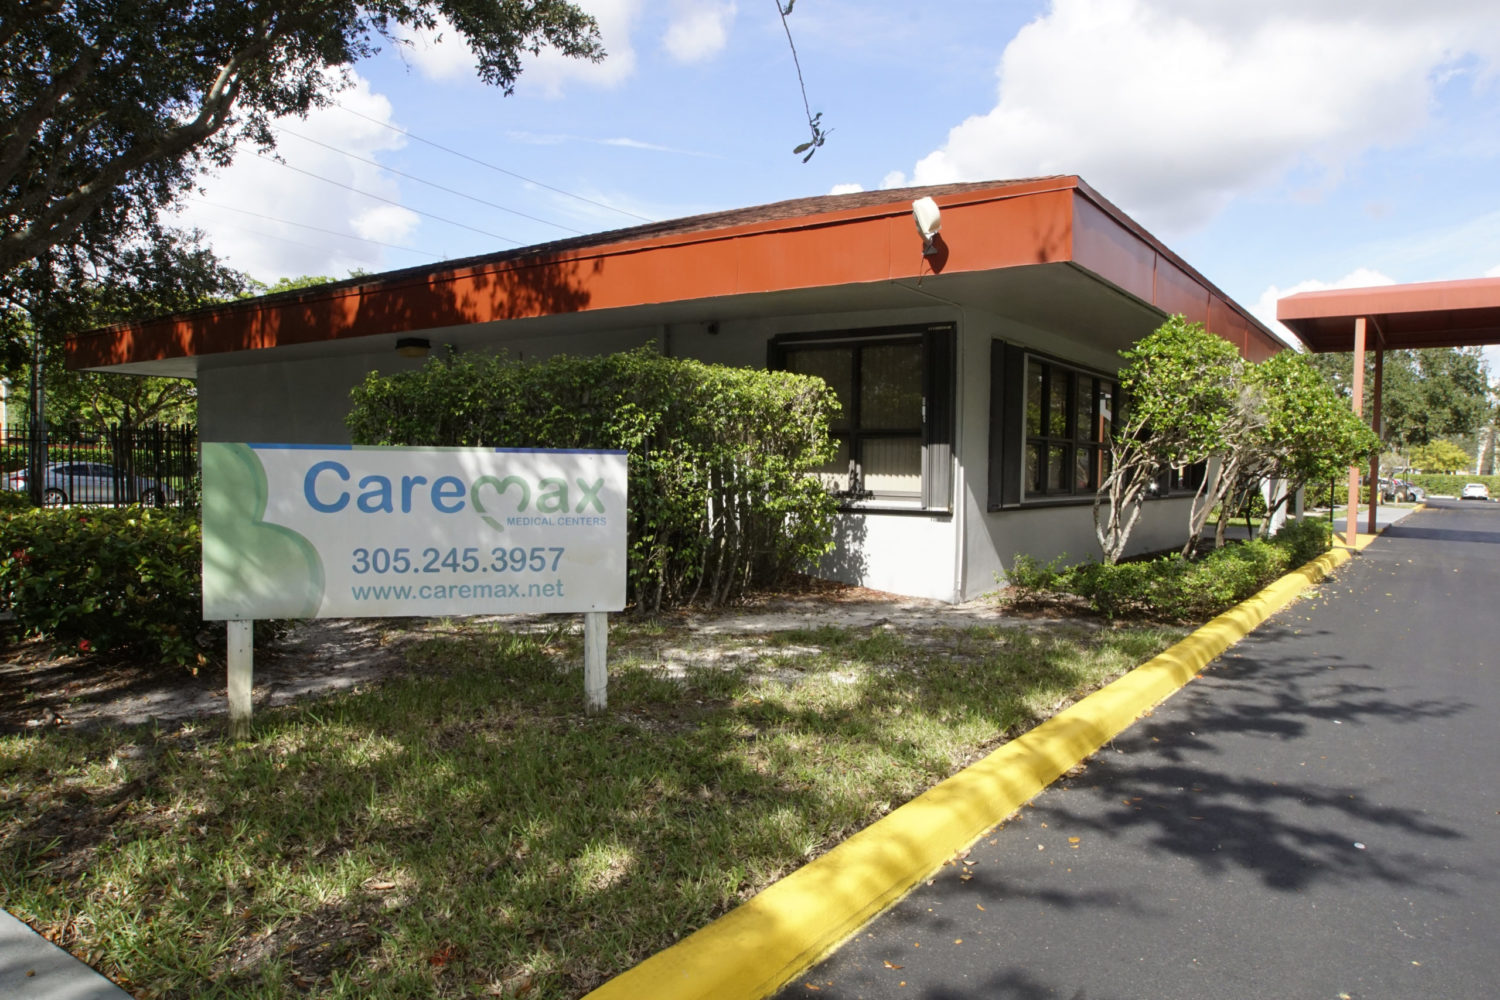 CareMax Pembroke Pines – NW 103rd Ave